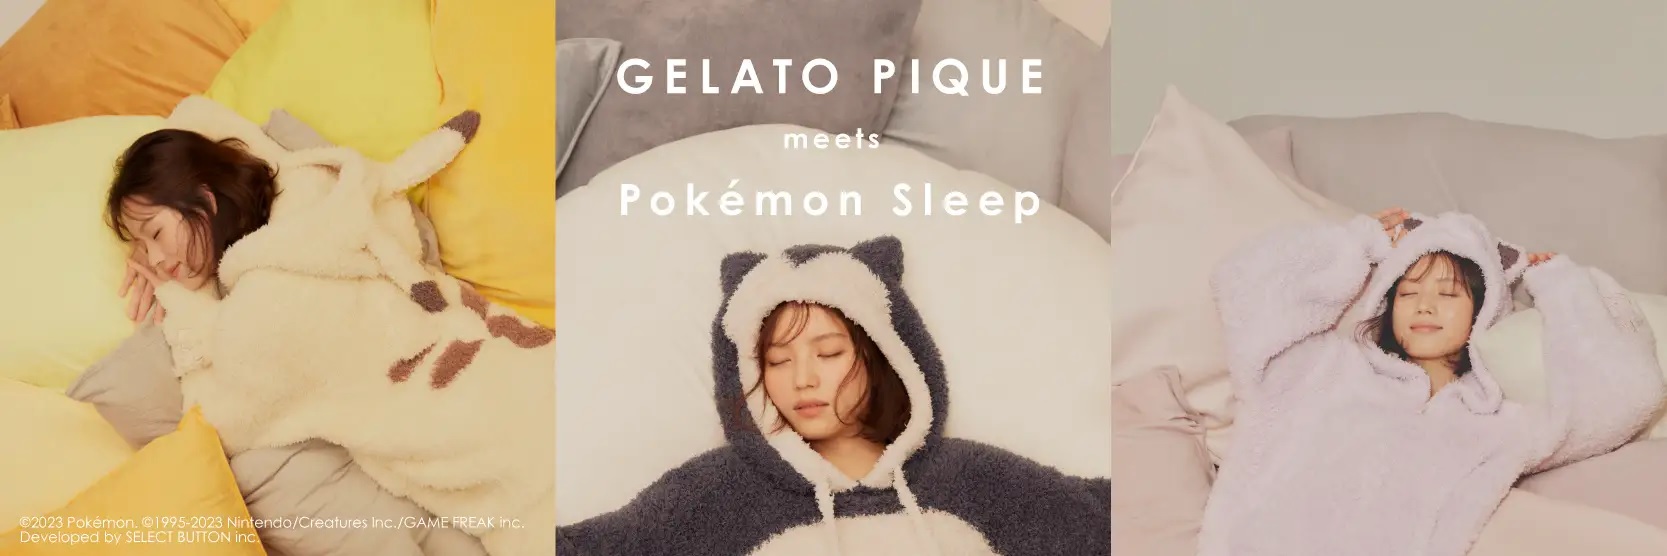 Become snoozing Pikachu Snorlax with new Pokémon Sleep line from